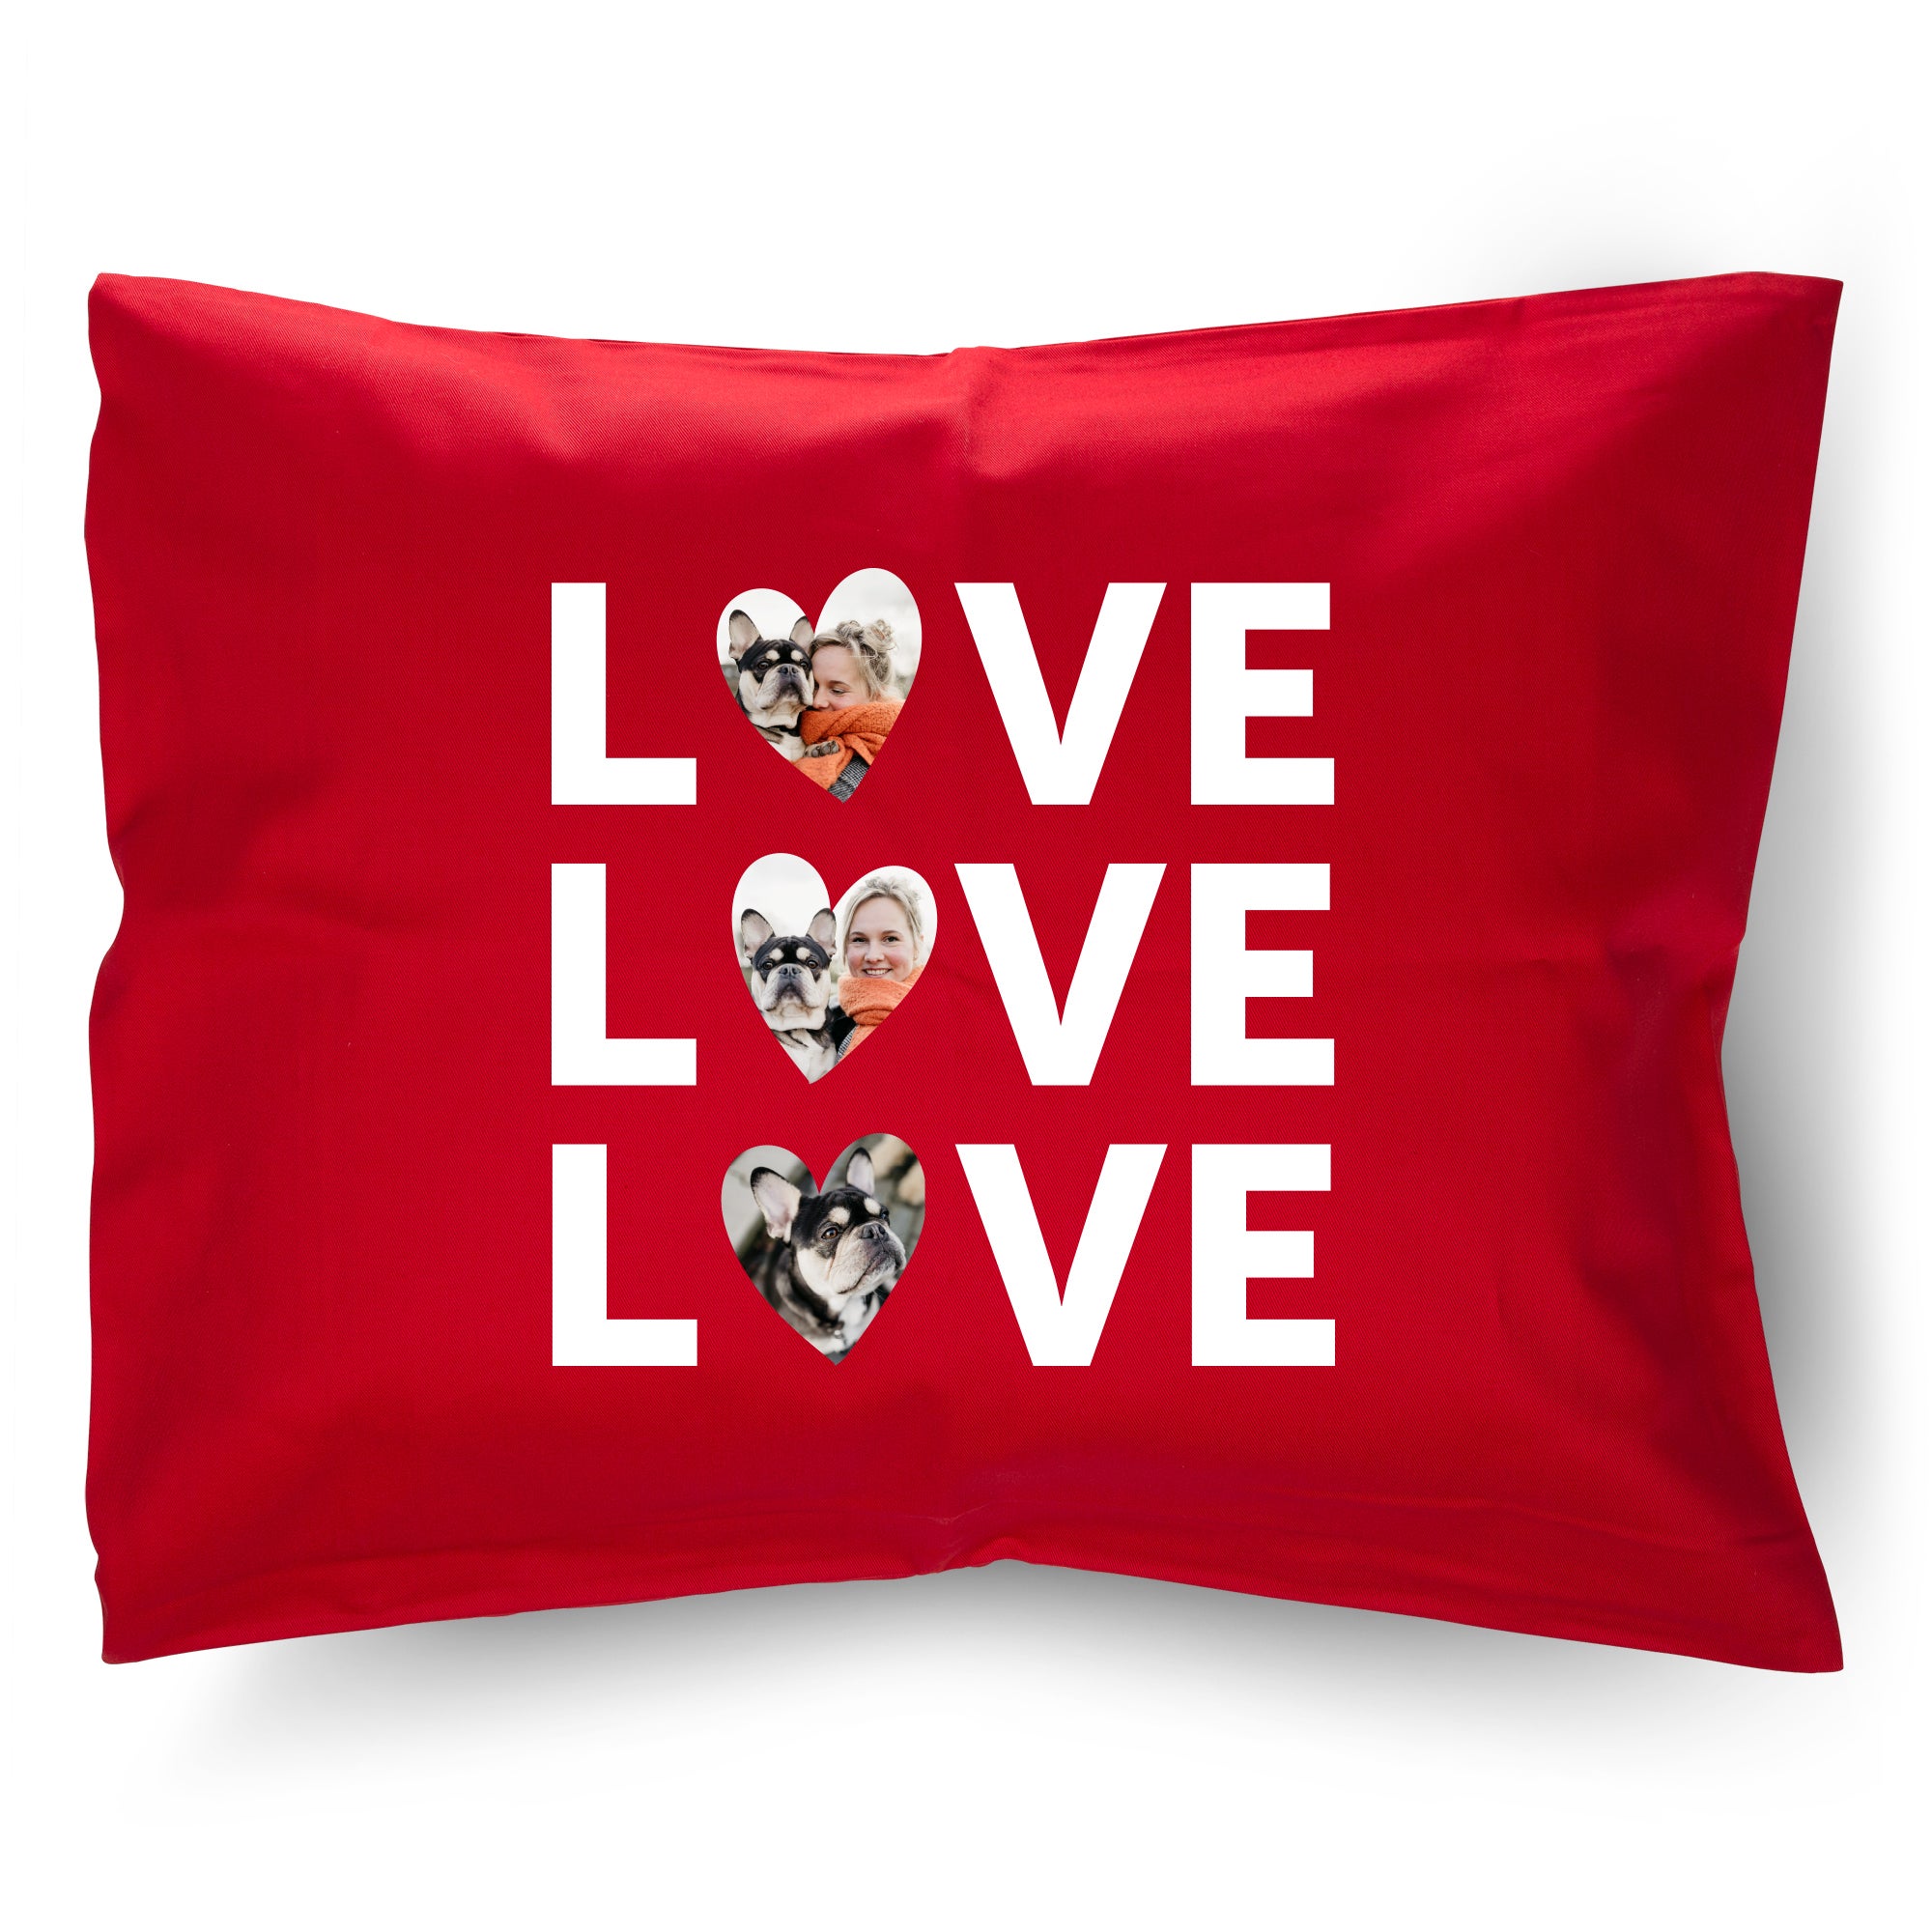 Personalised cushion - Red - 50 x 60 cm